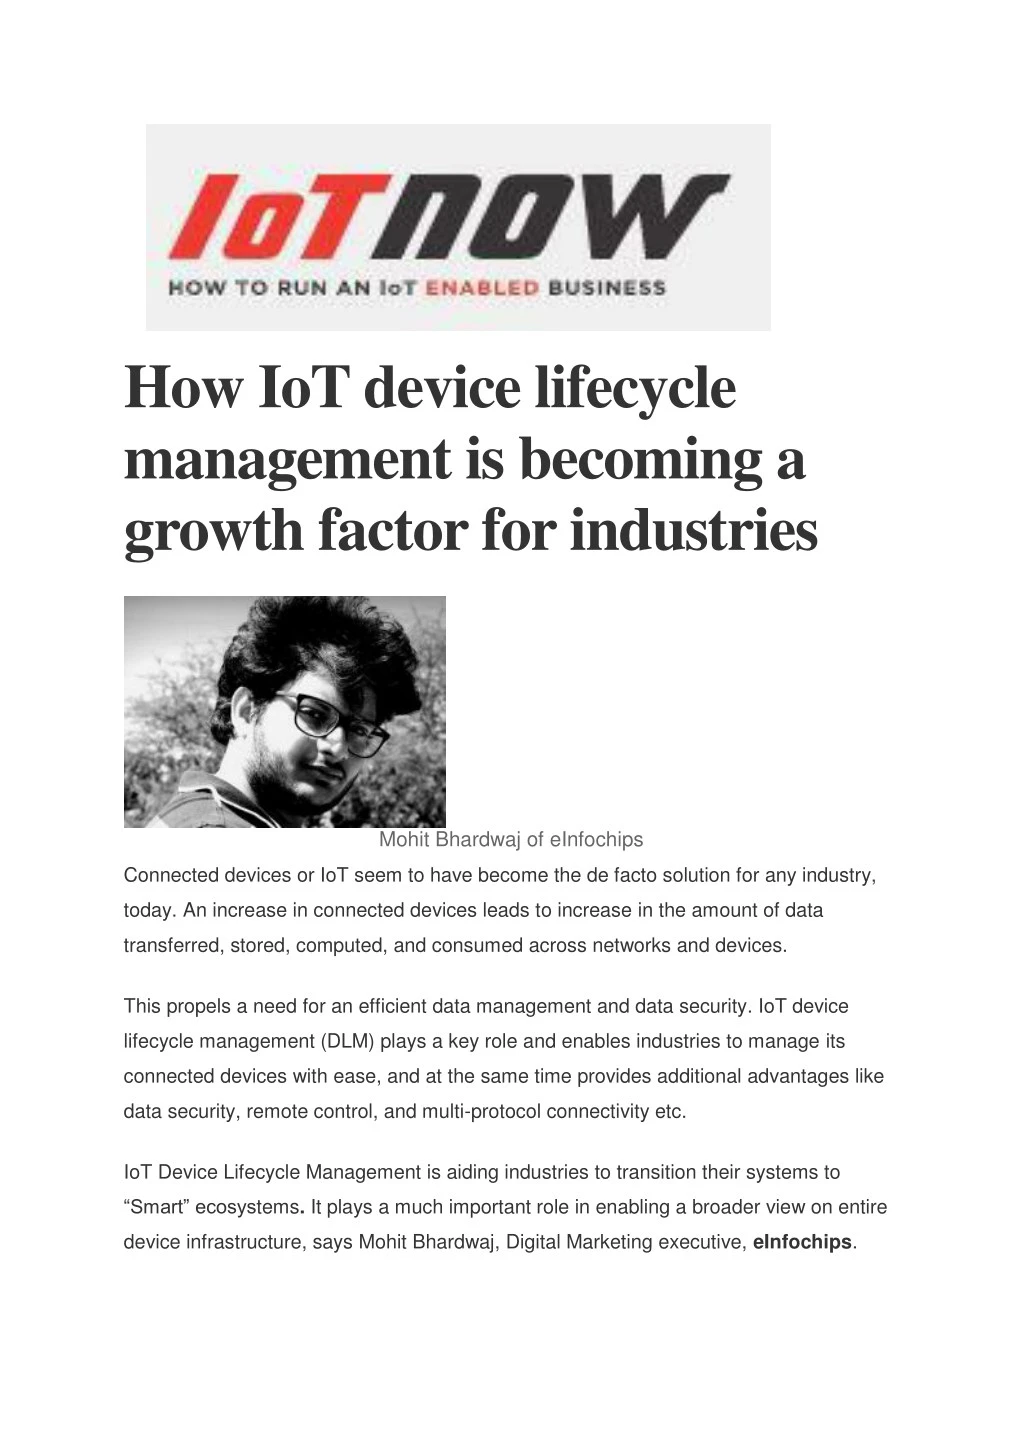 how iot device lifecycle management is becoming